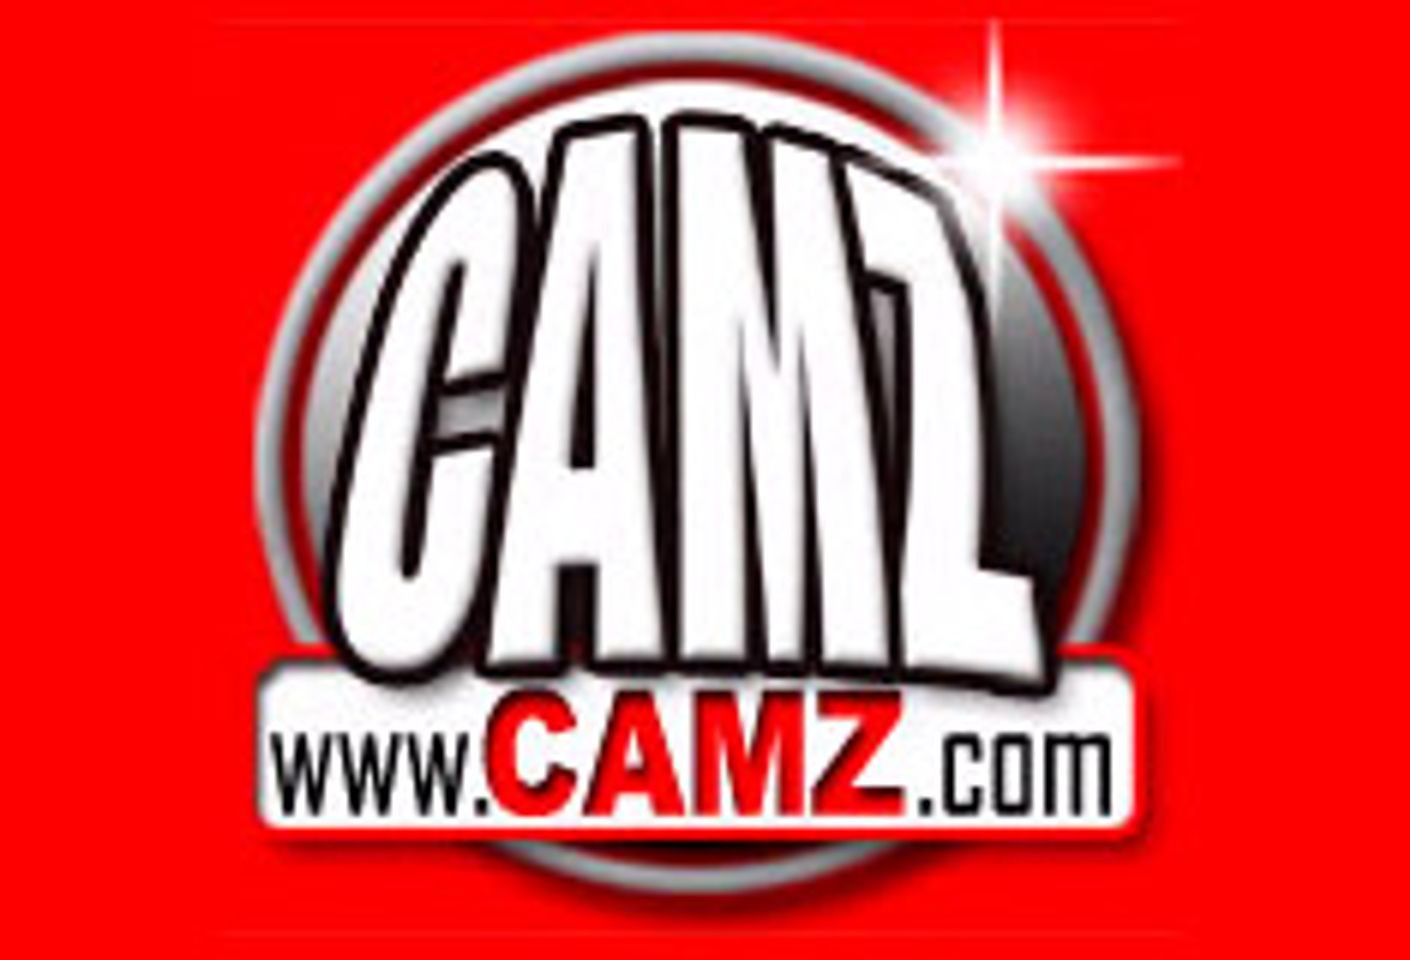 CamZ.com Offers Free Hosting to Long-Time Clients